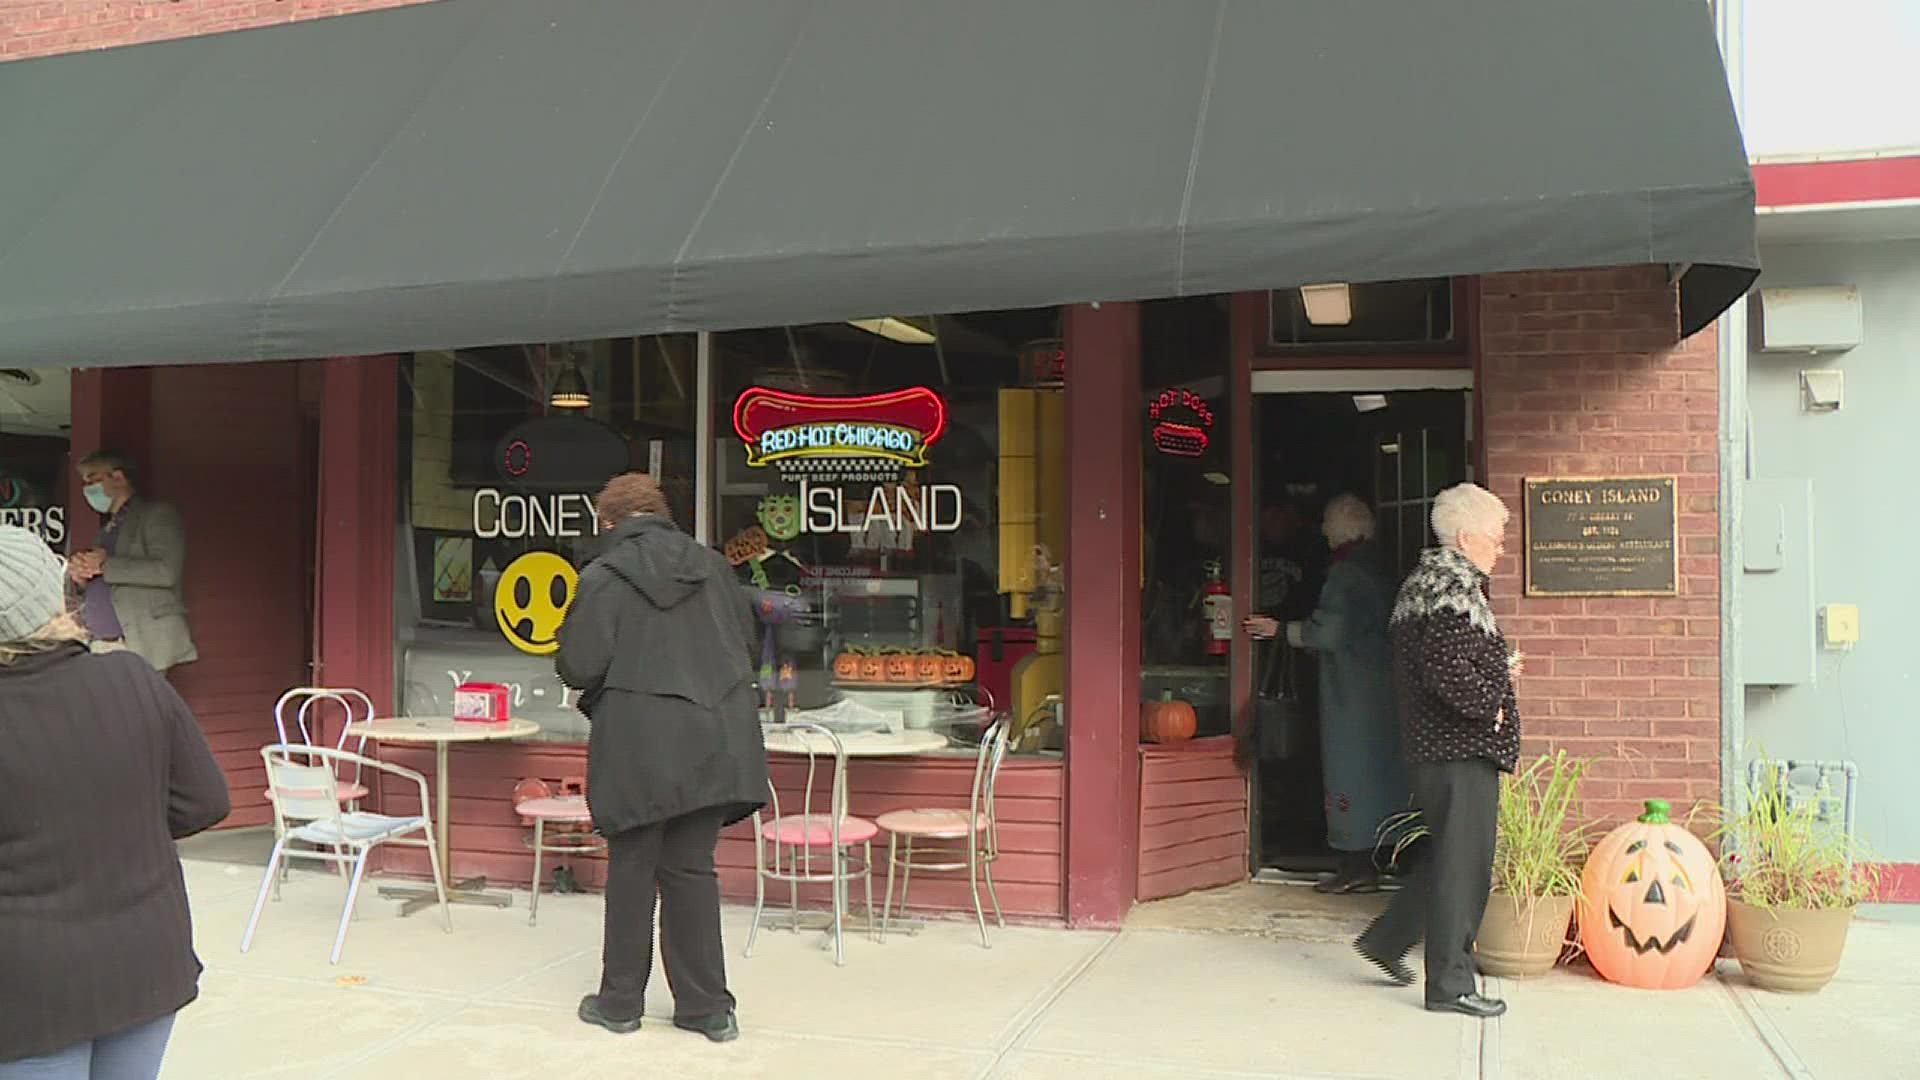 Galesburg historical Society recognized Coney Island restaurant for their centennial anniversary.